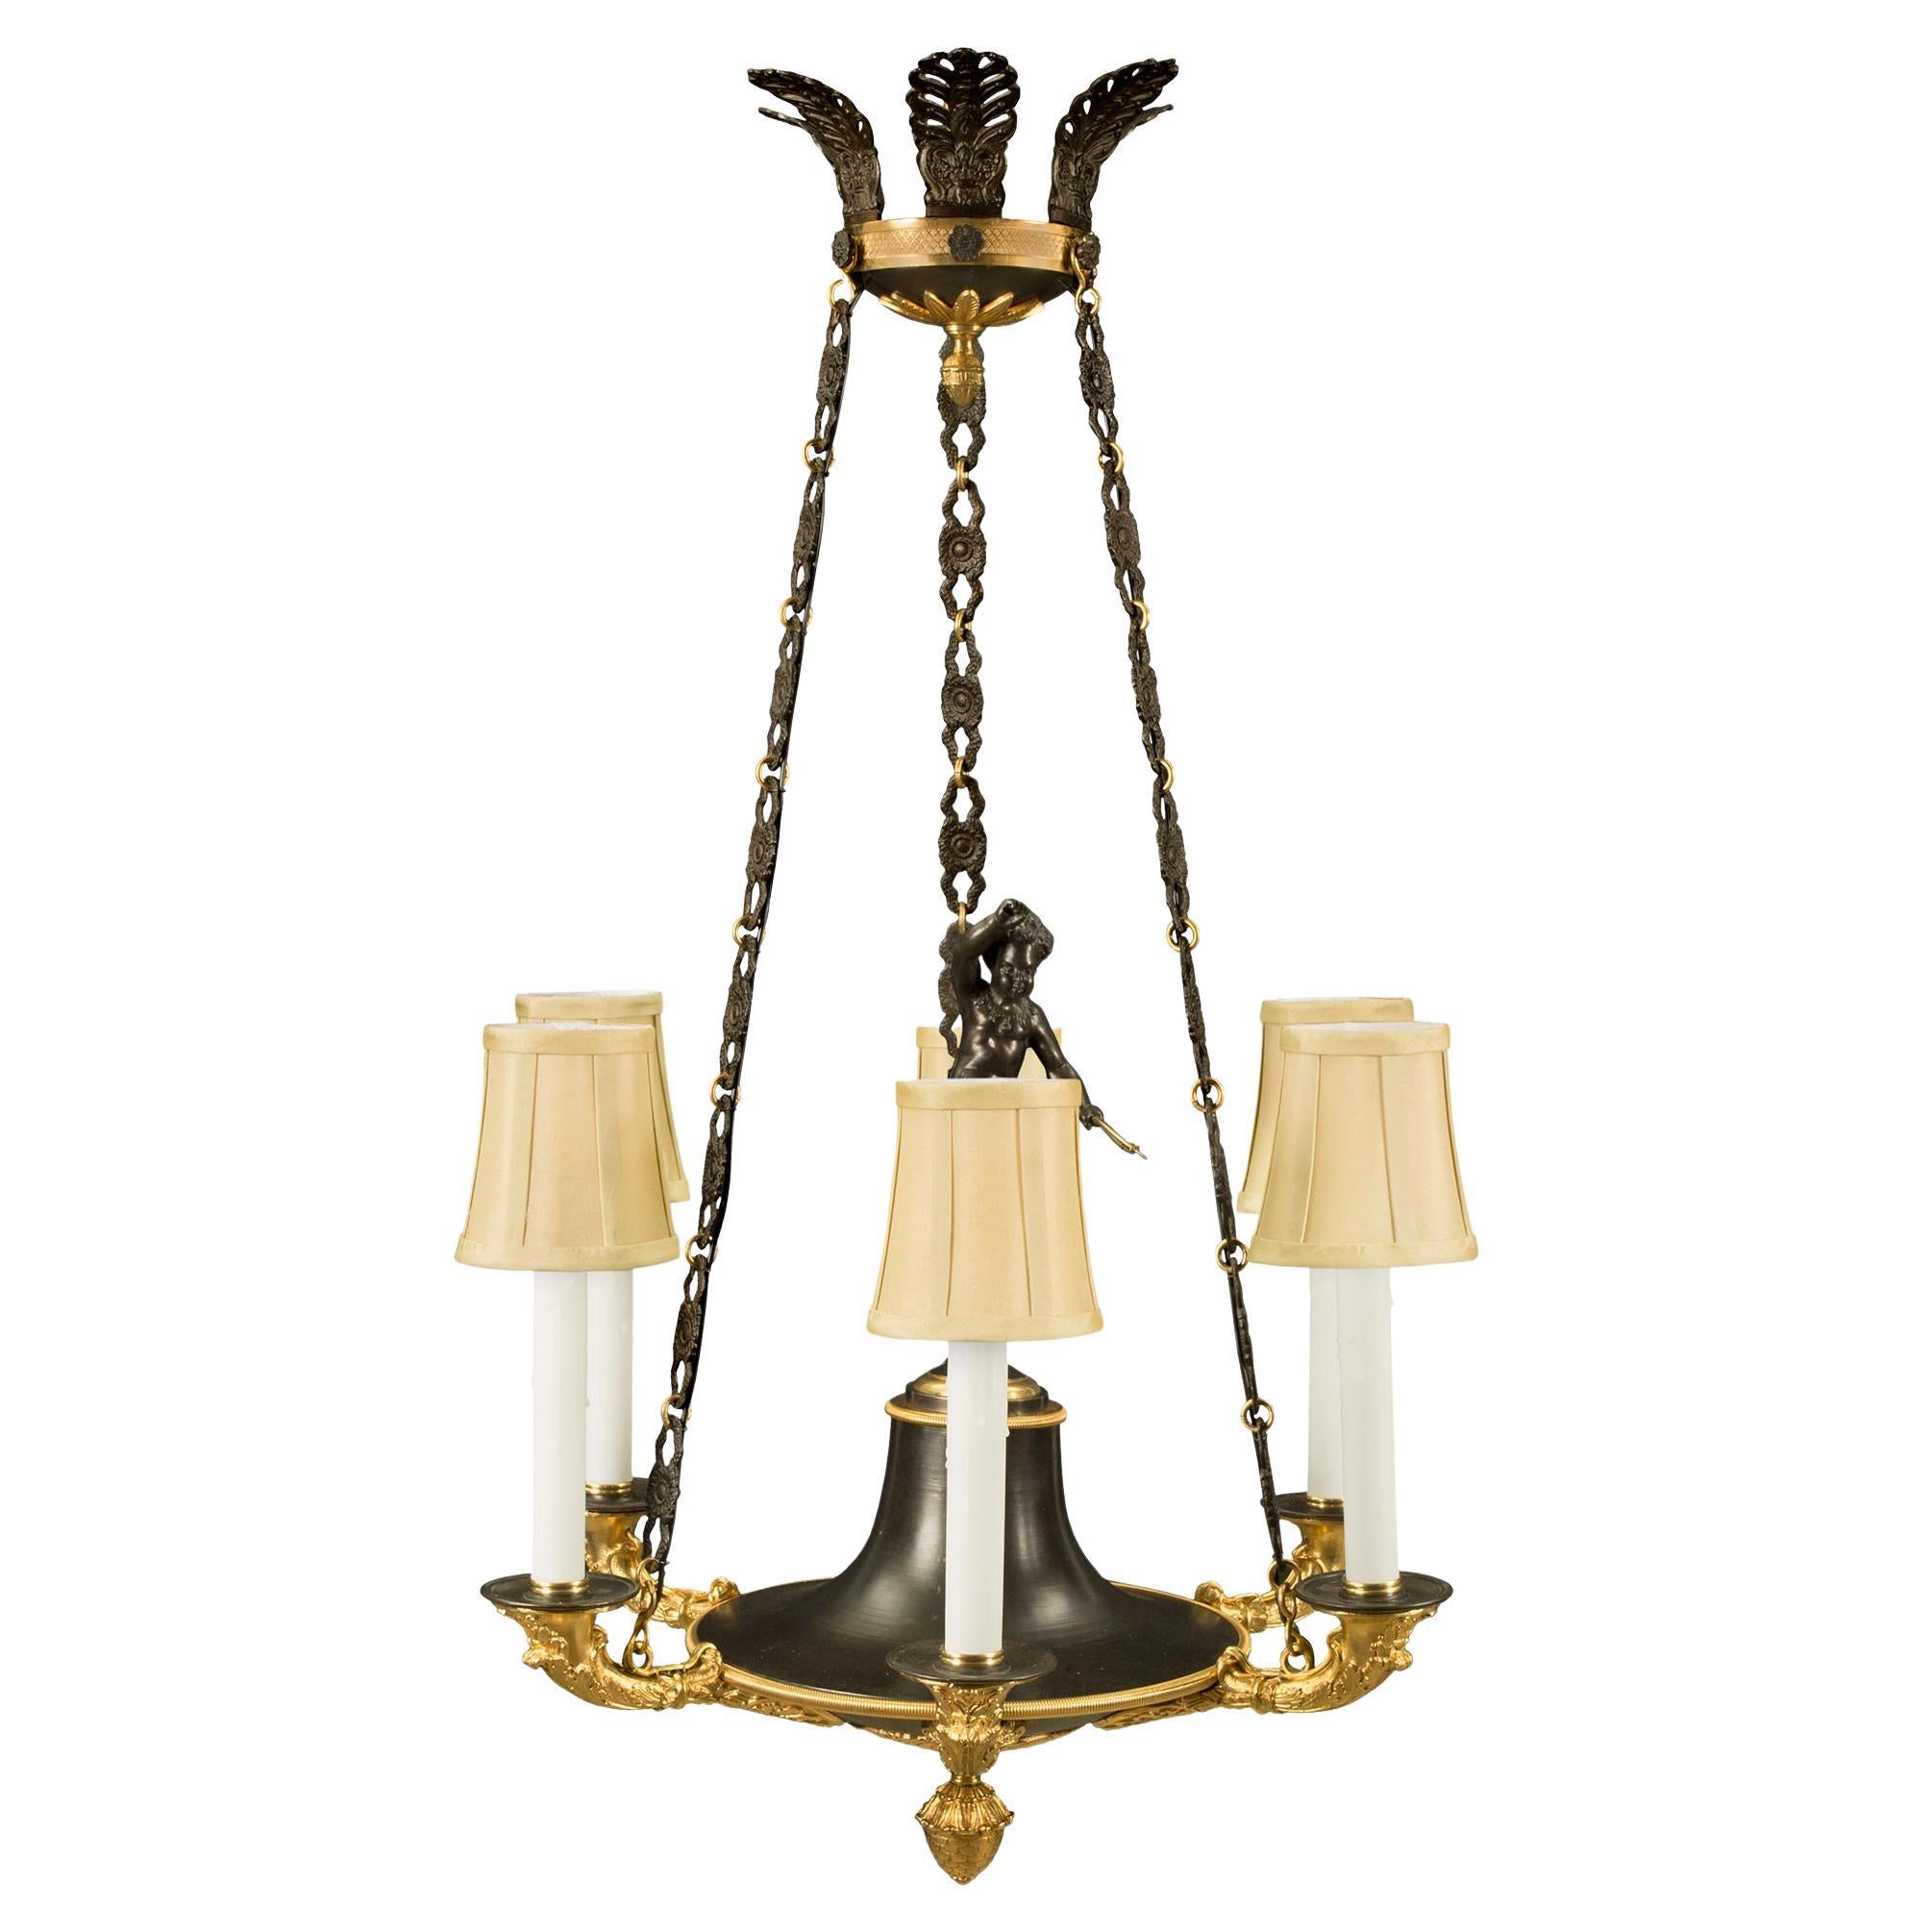 French 19th Century Neoclassical Style Bronze and Ormolu Chandelier